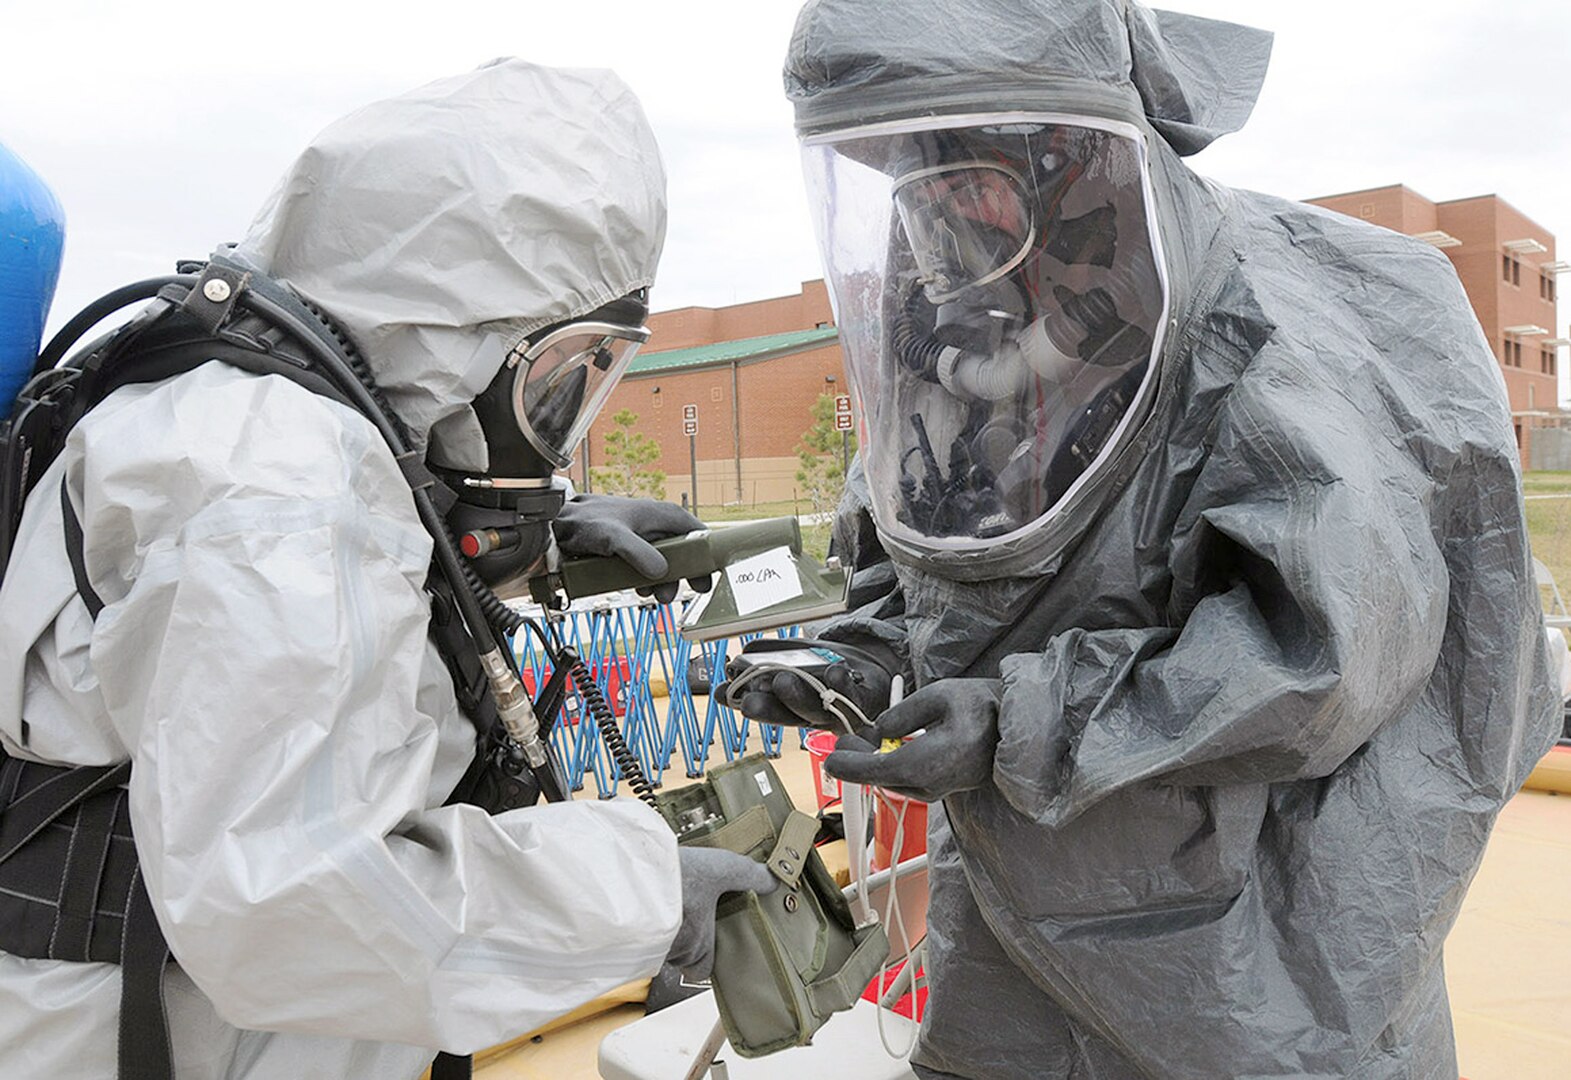 Army Sgt. 1st Class Marcia Hento (left) rehearses the process of decontaminating a camera used by Air Force
Tech. Sgt. Dustin Clement, both members of the South Dakota National Guard’s 82nd Civil Support Team,
during a training exercise April 22 at Camp Rapid in Rapid City, S.D. The exercise, facilitated by U.S. Army
North’s Civil Support Training Activity, is designed to test the unit’s ability to respond to a chemical, biological,
radiological or nuclear incident. The CSTA is based out of Joint Base San Antonio-Fort Sam Houston.